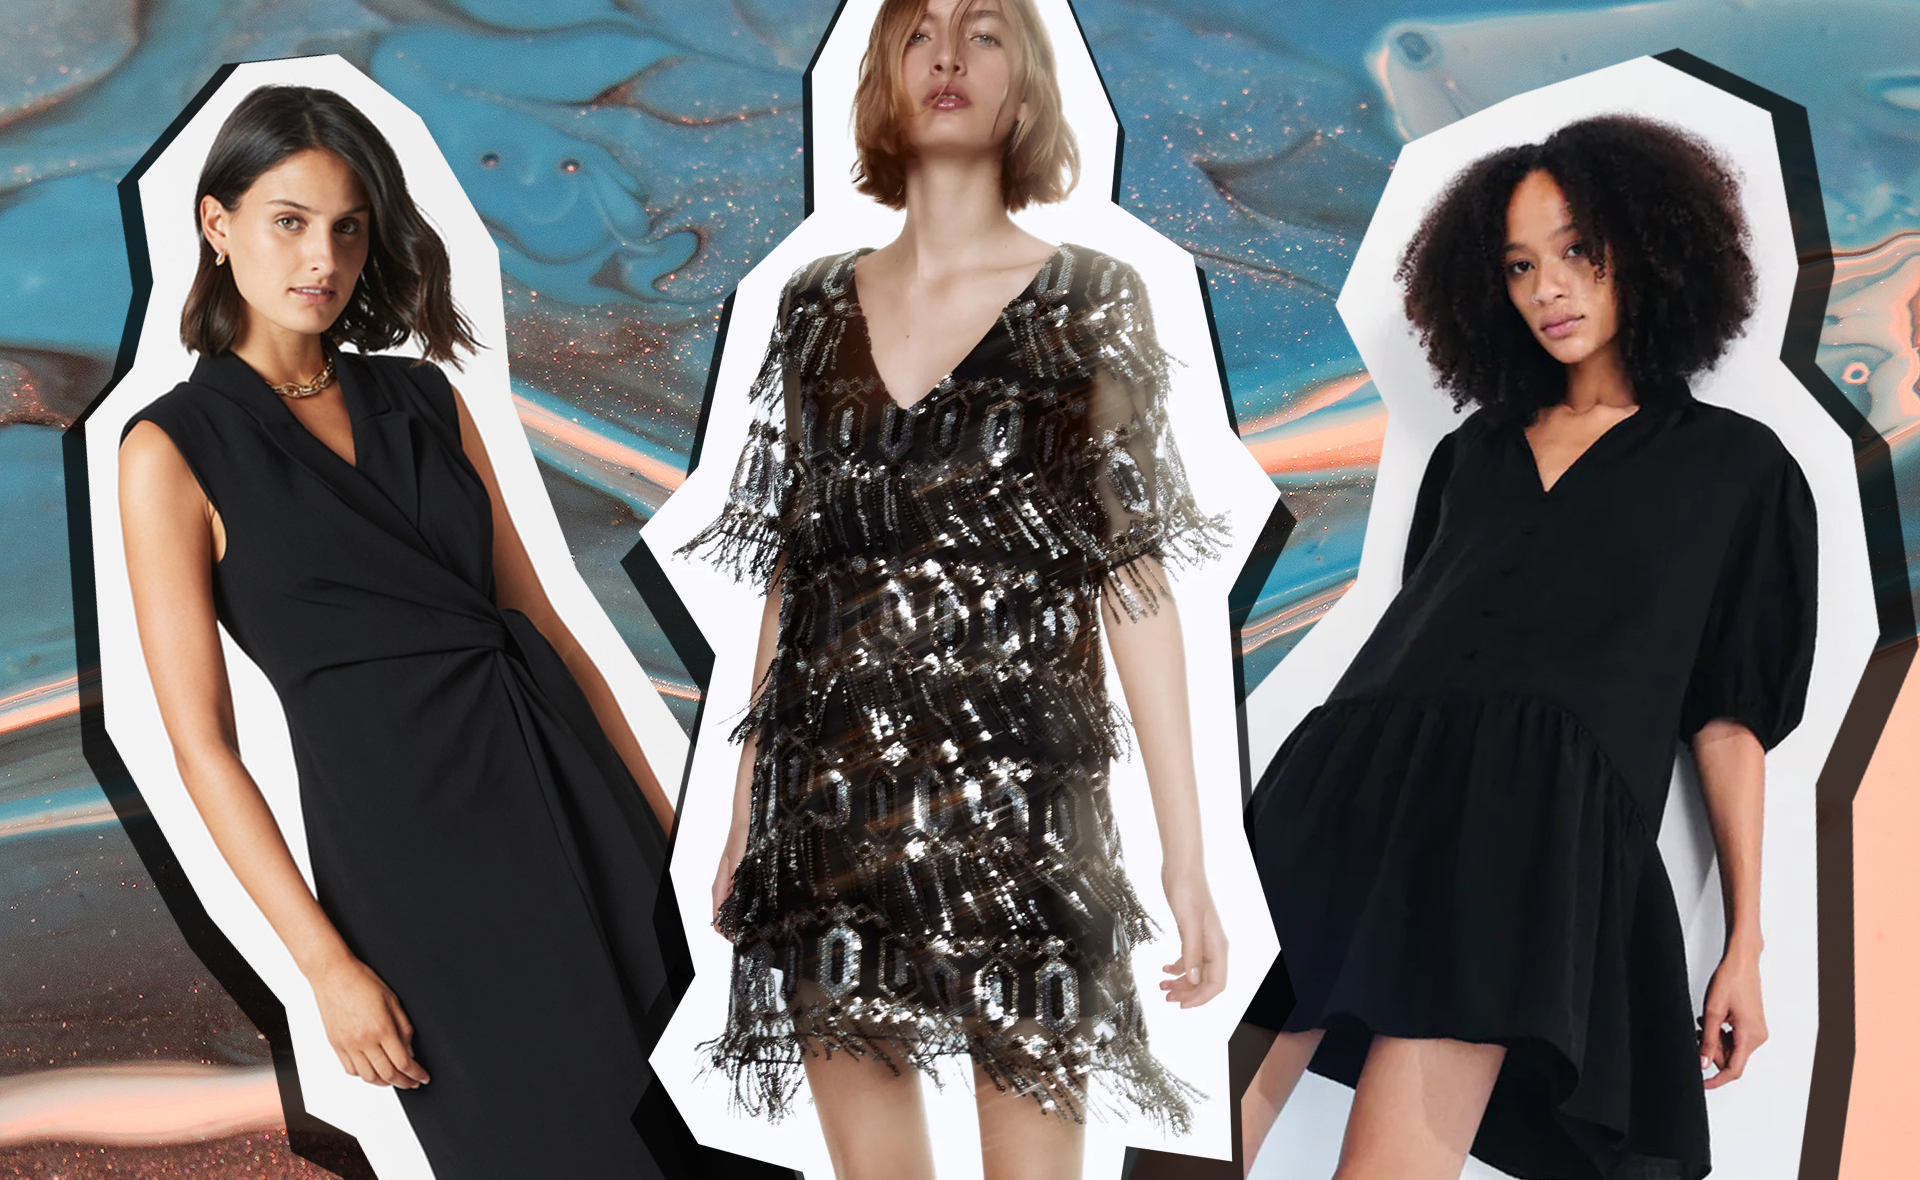 These perfect New Year’s Eve frocks prove the little black dress will never go out of style!